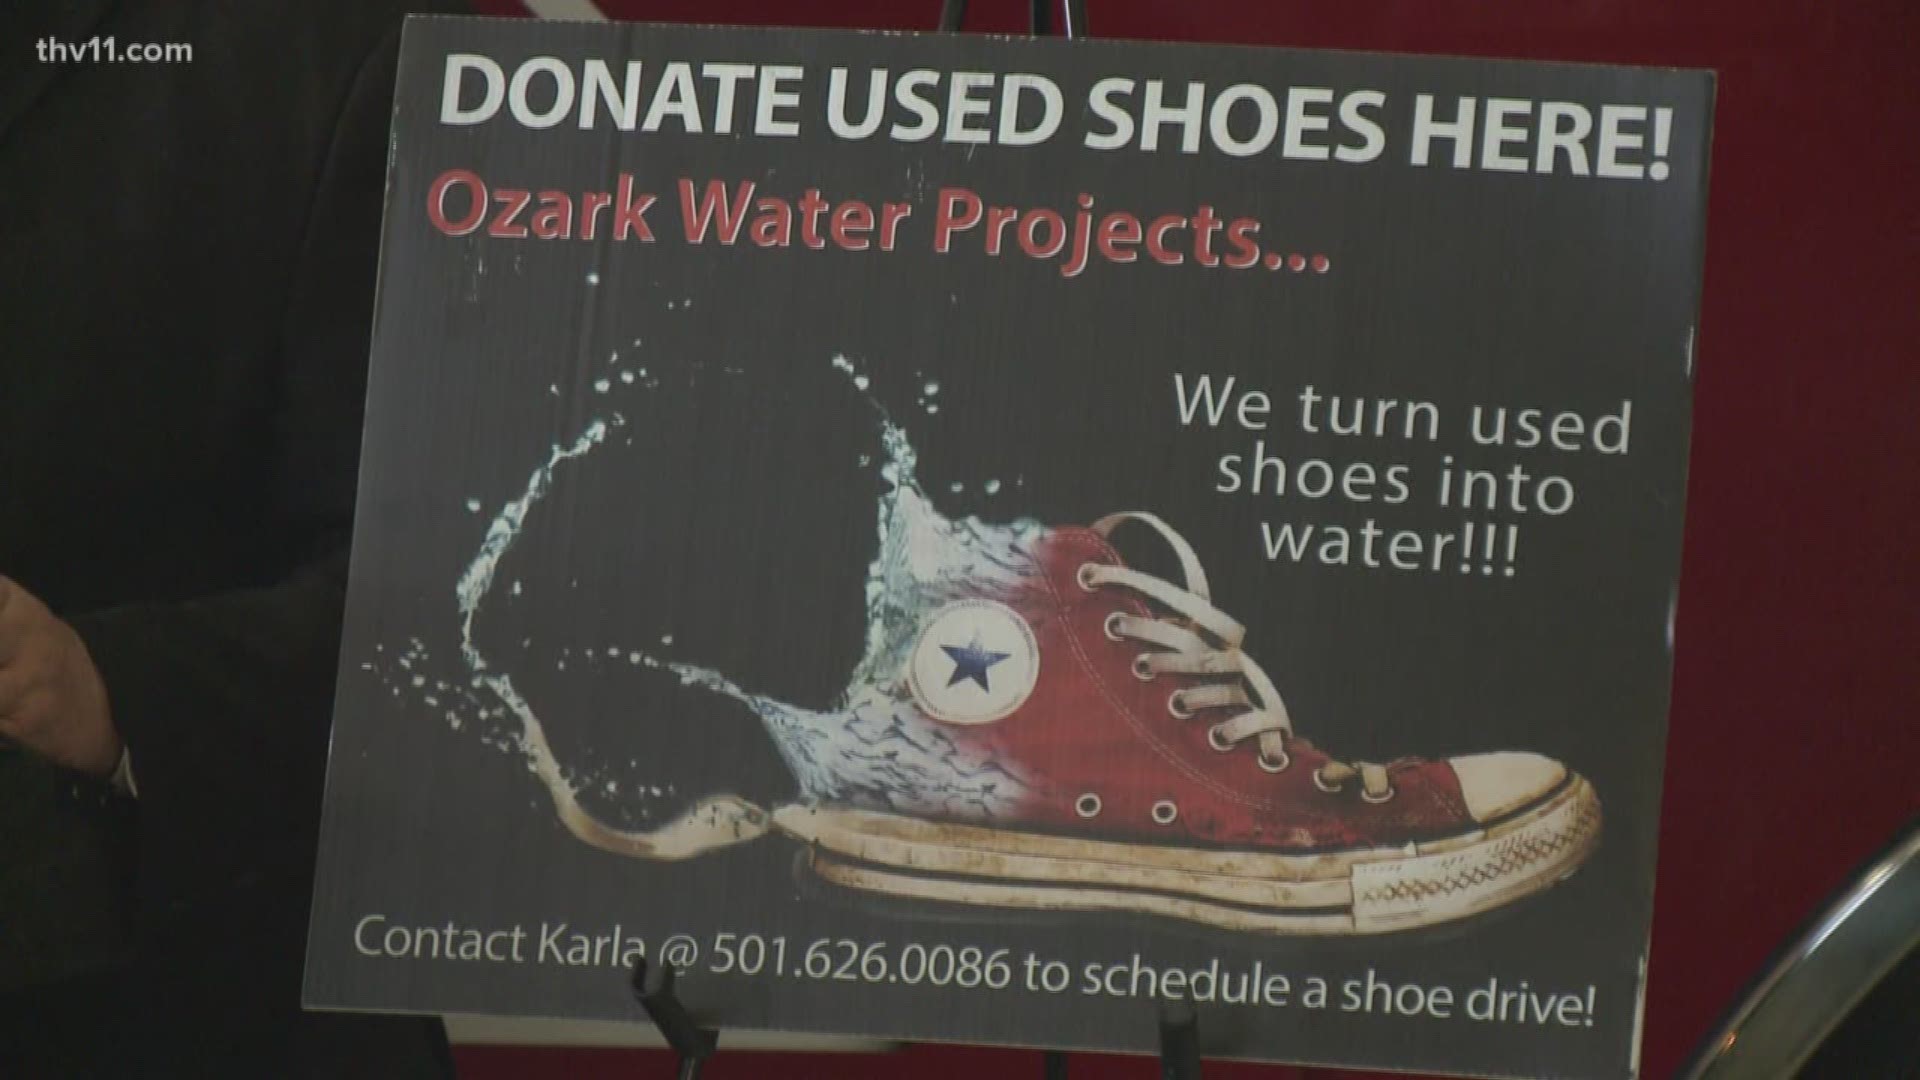 Little Rock Fire holds shoe drive to promote clean water